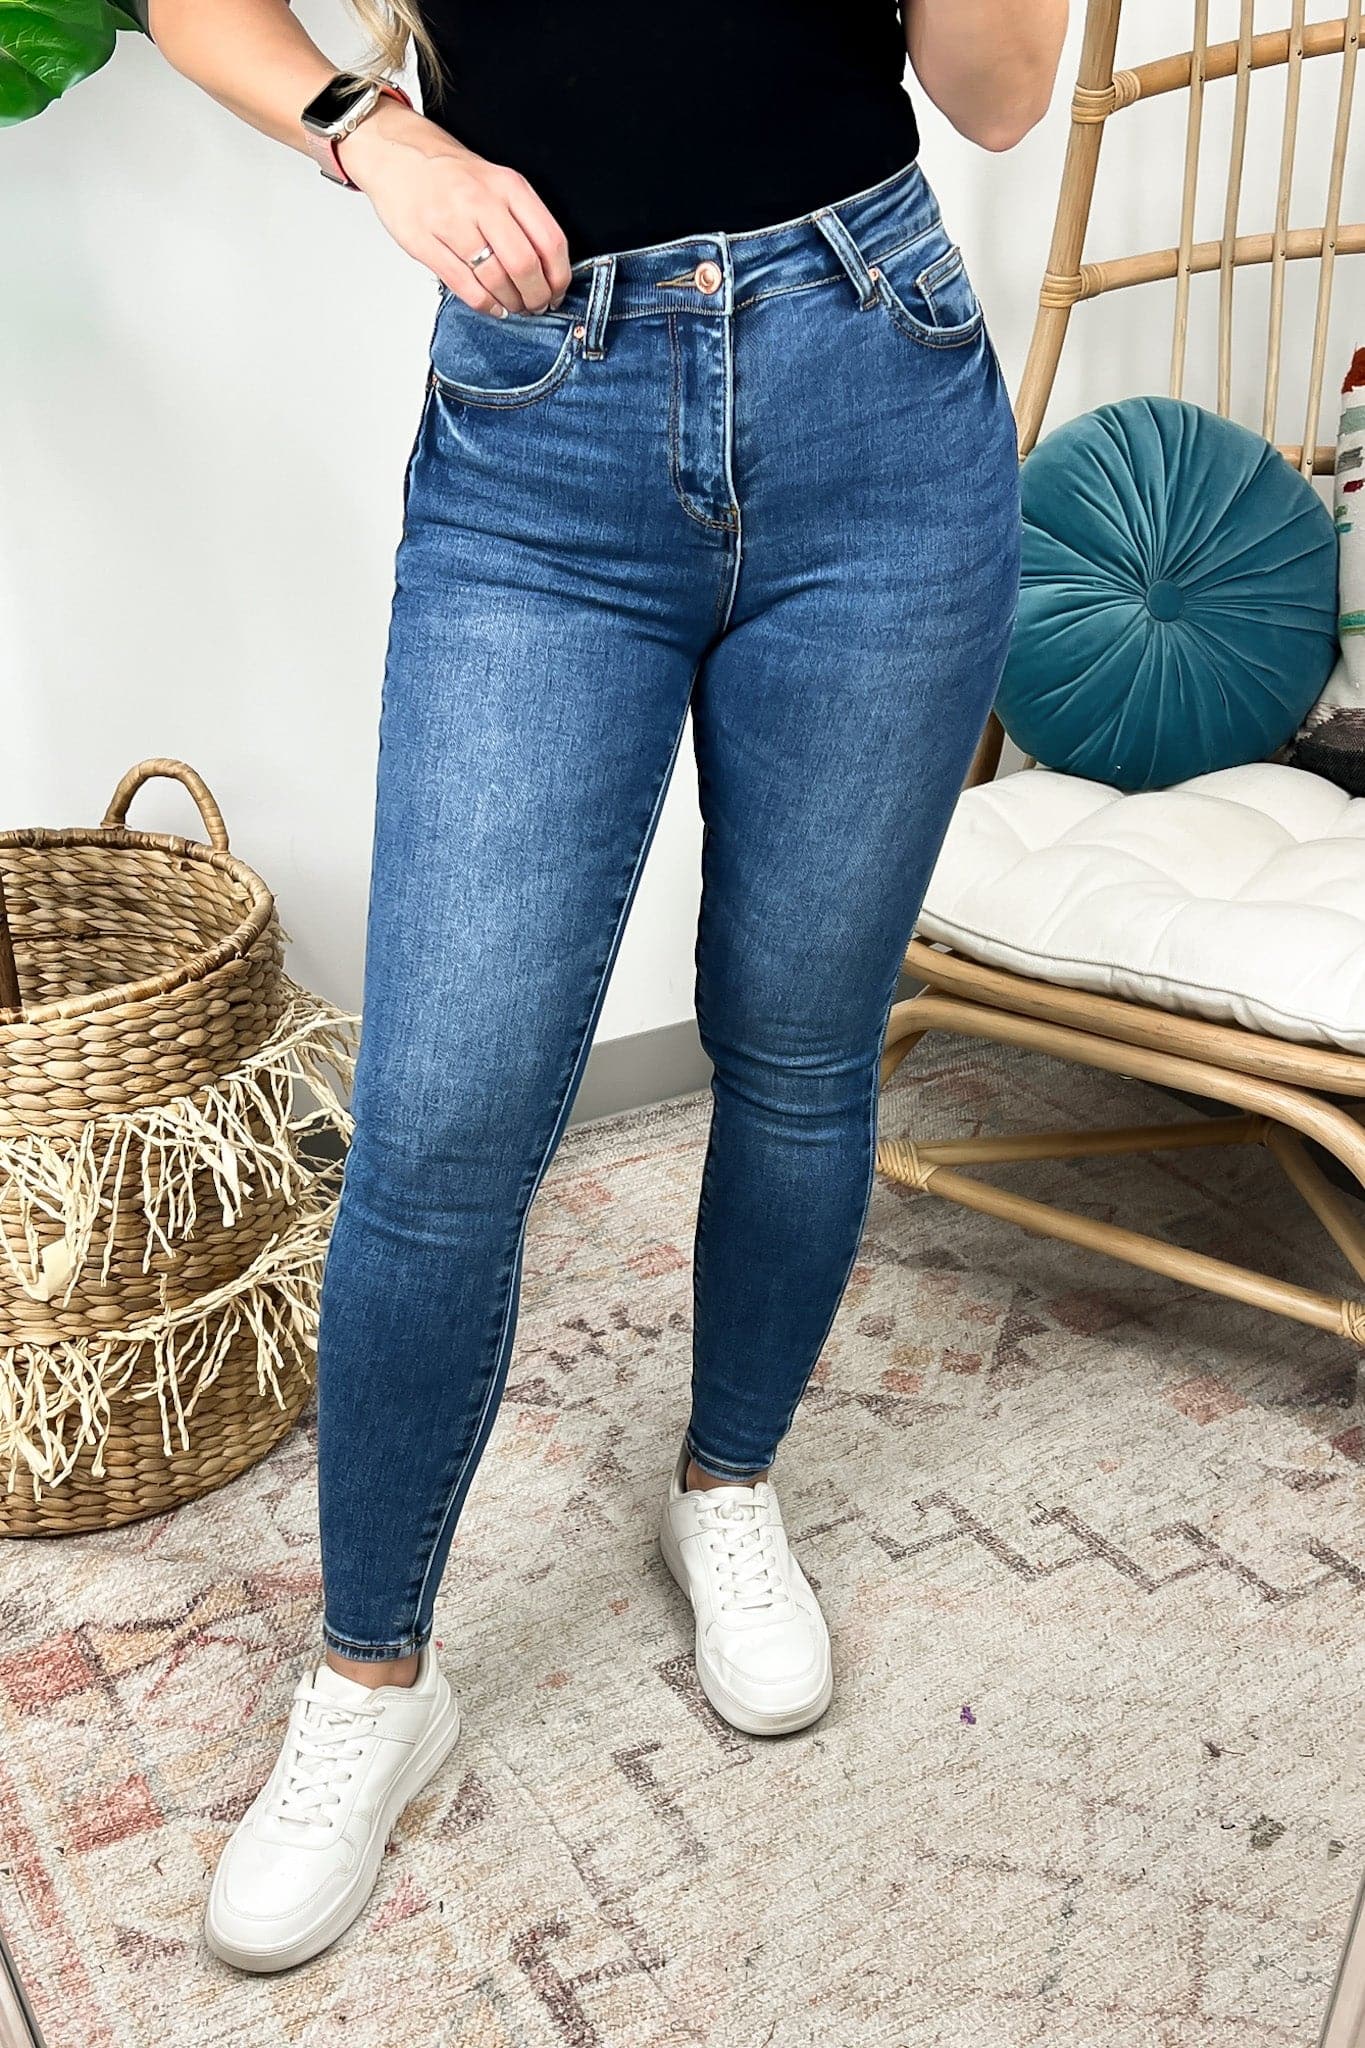  Phoebee Push-Up Skinny Jeans - Madison and Mallory